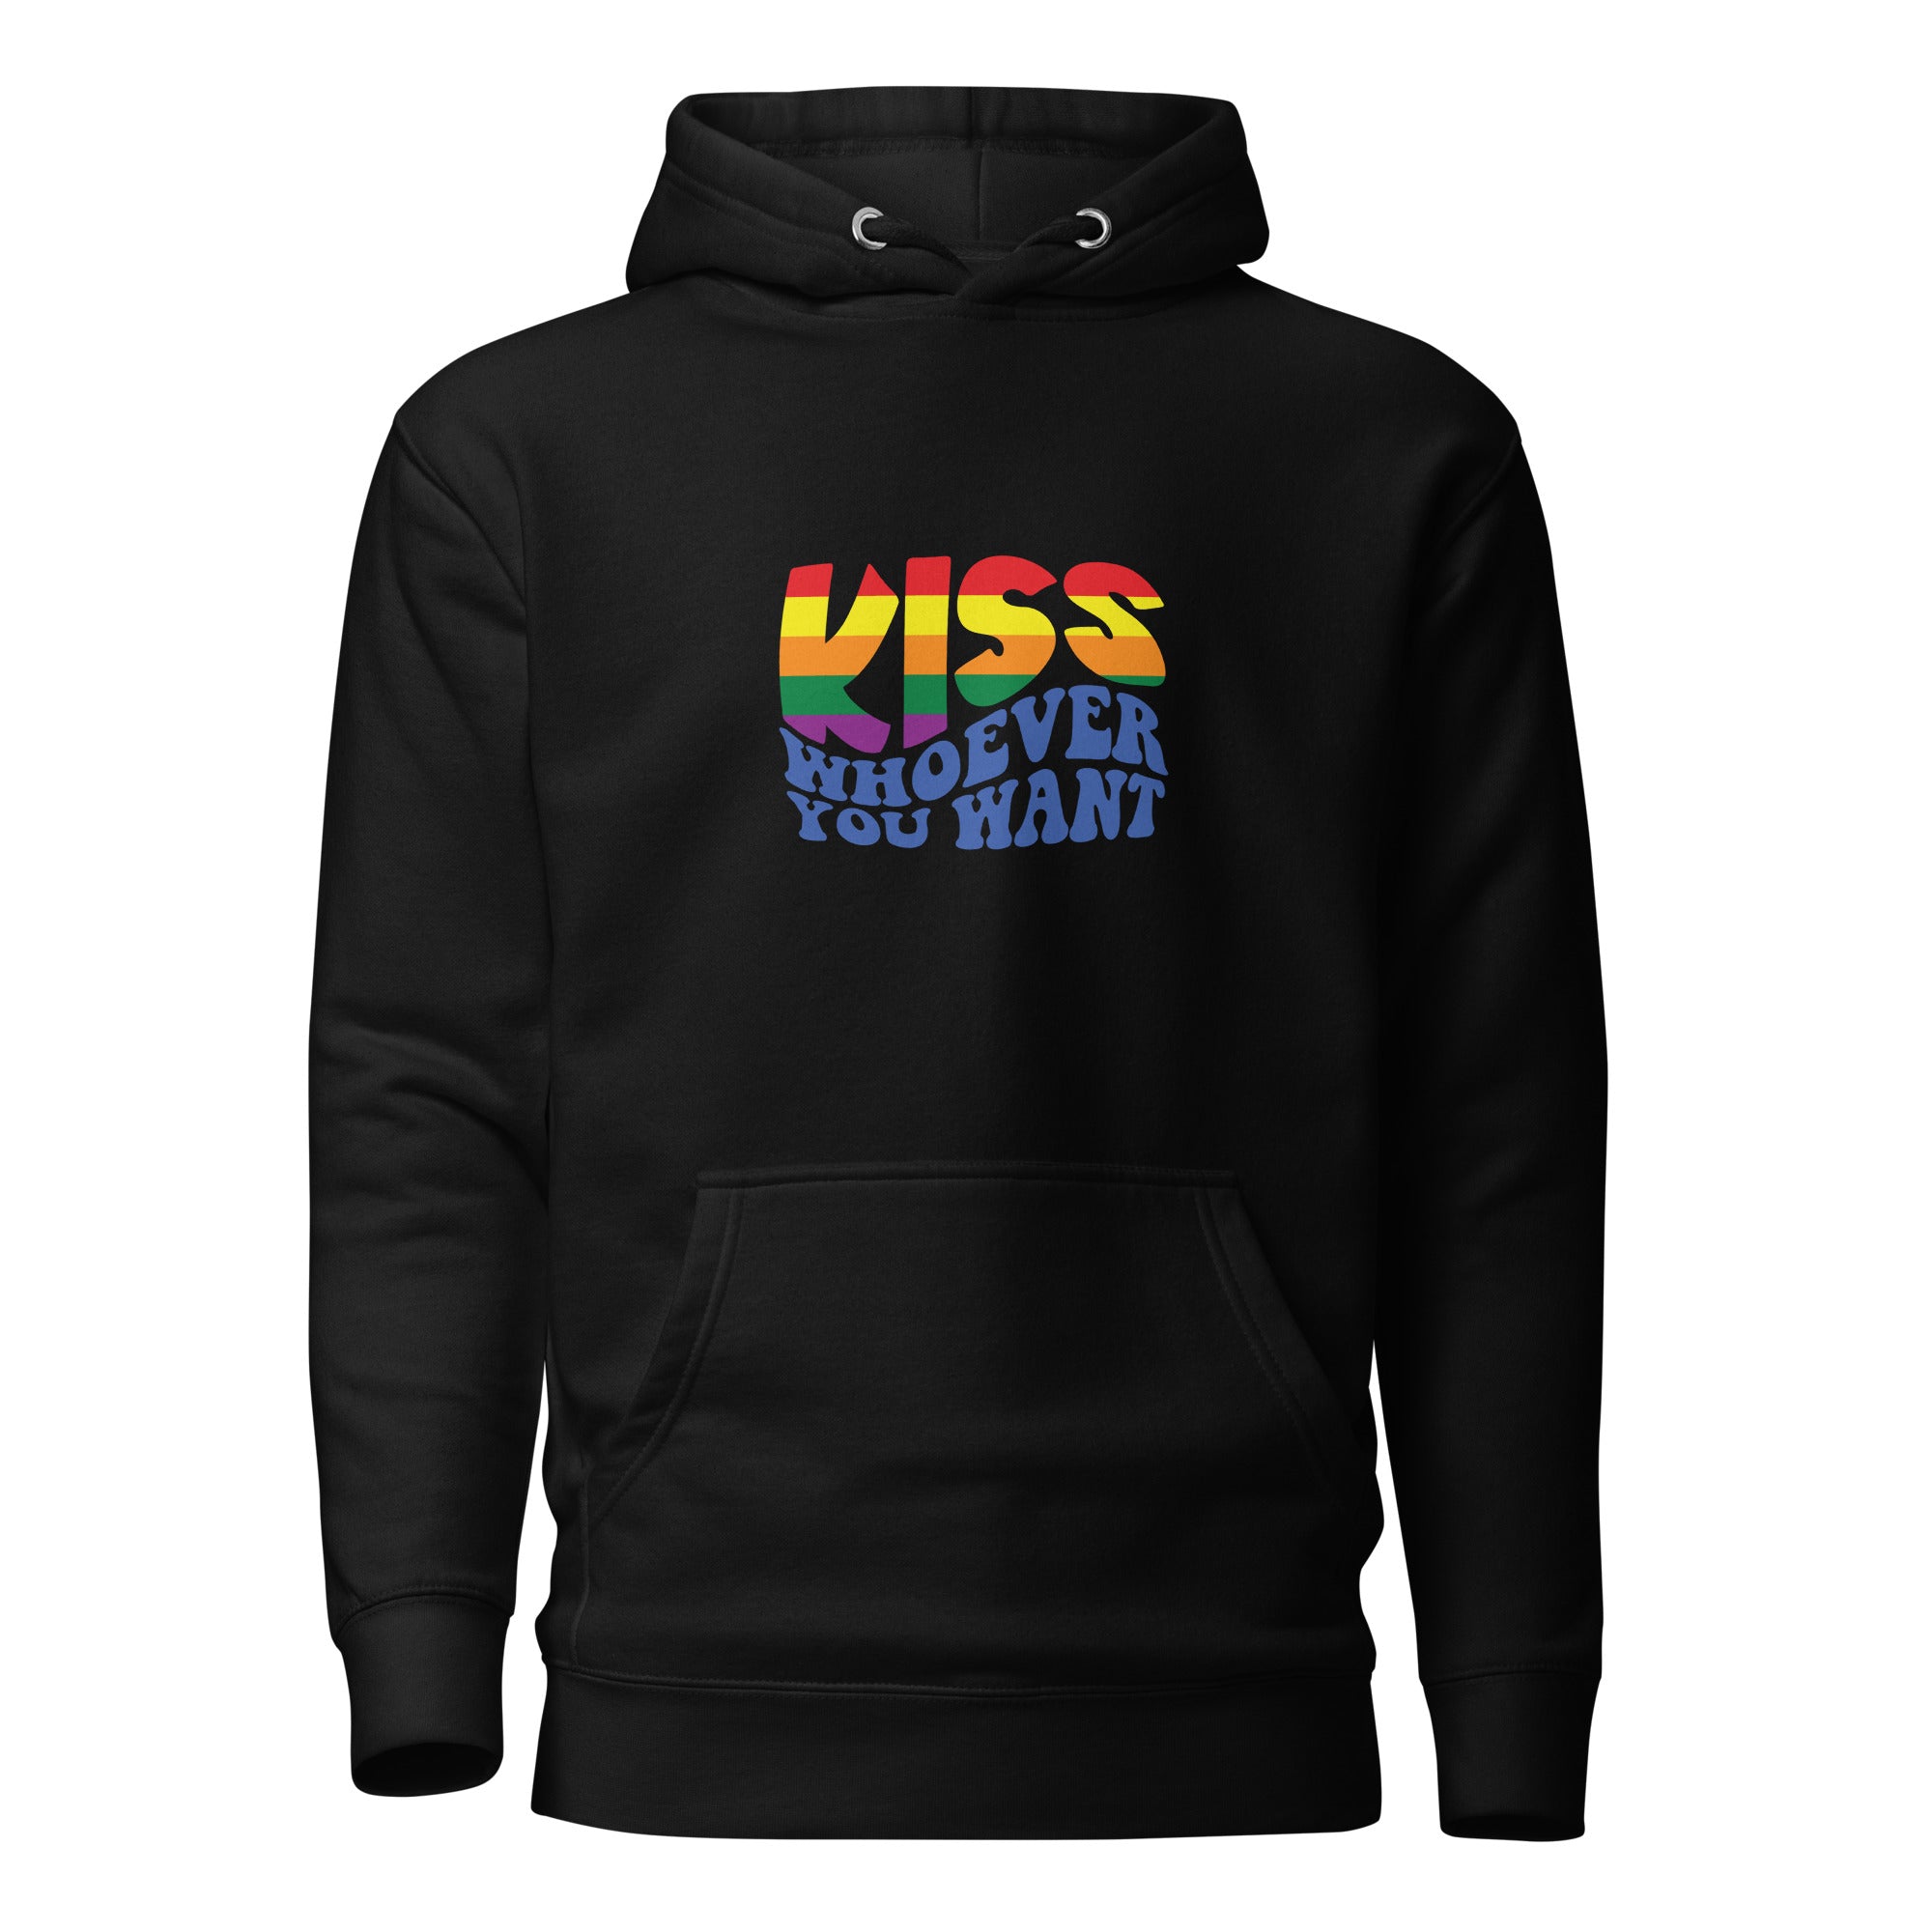 Unisex Hoodie- Kiss whoever you want